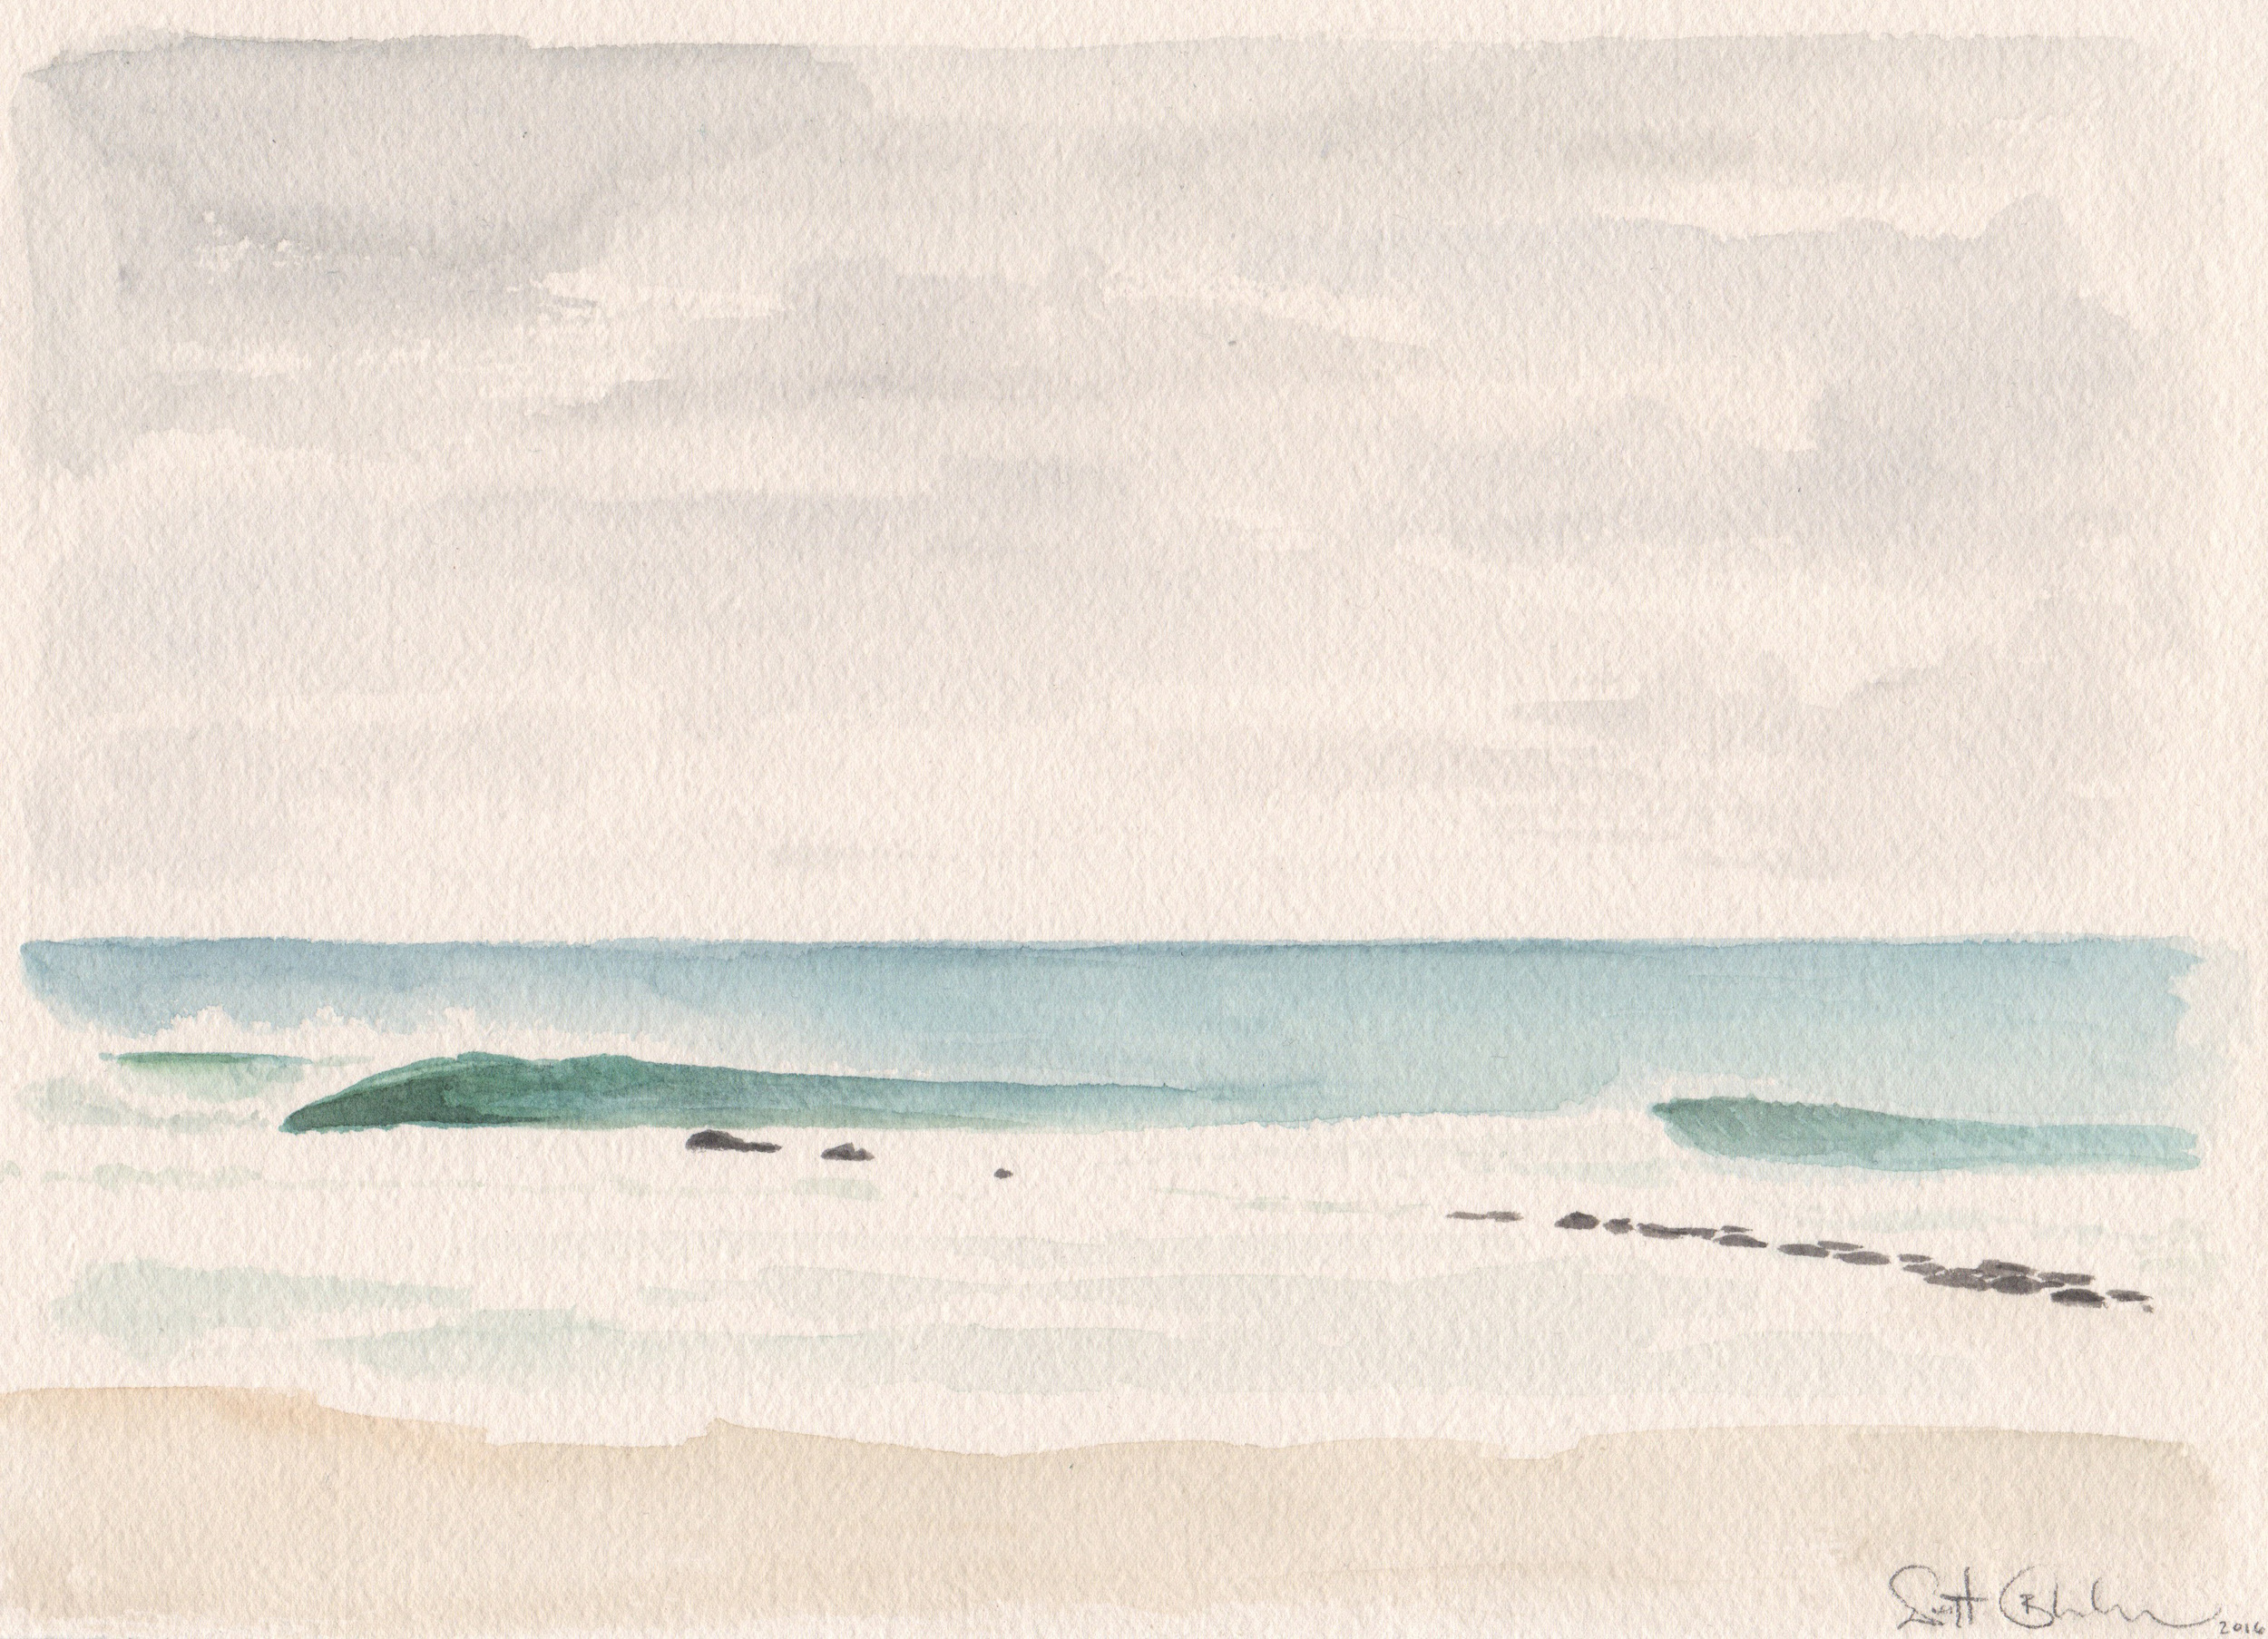    First Jetty Lefts    watercolor on paper  7" x 11"  2016  (sold)  &nbsp; 